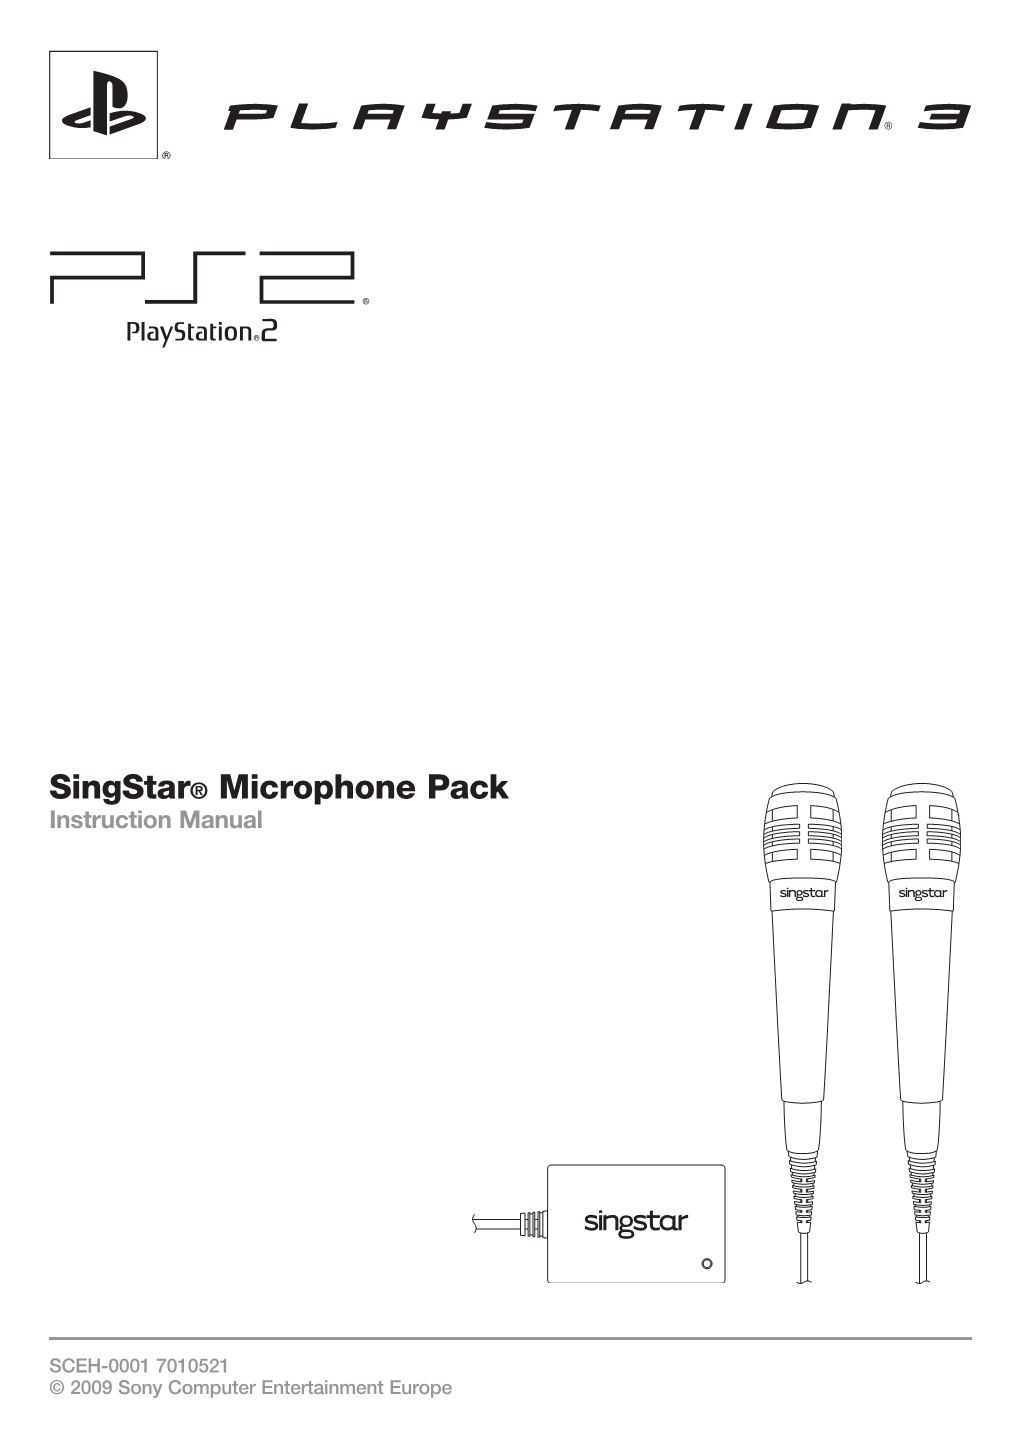 Singstar® Microphone Pack Instruction Manual